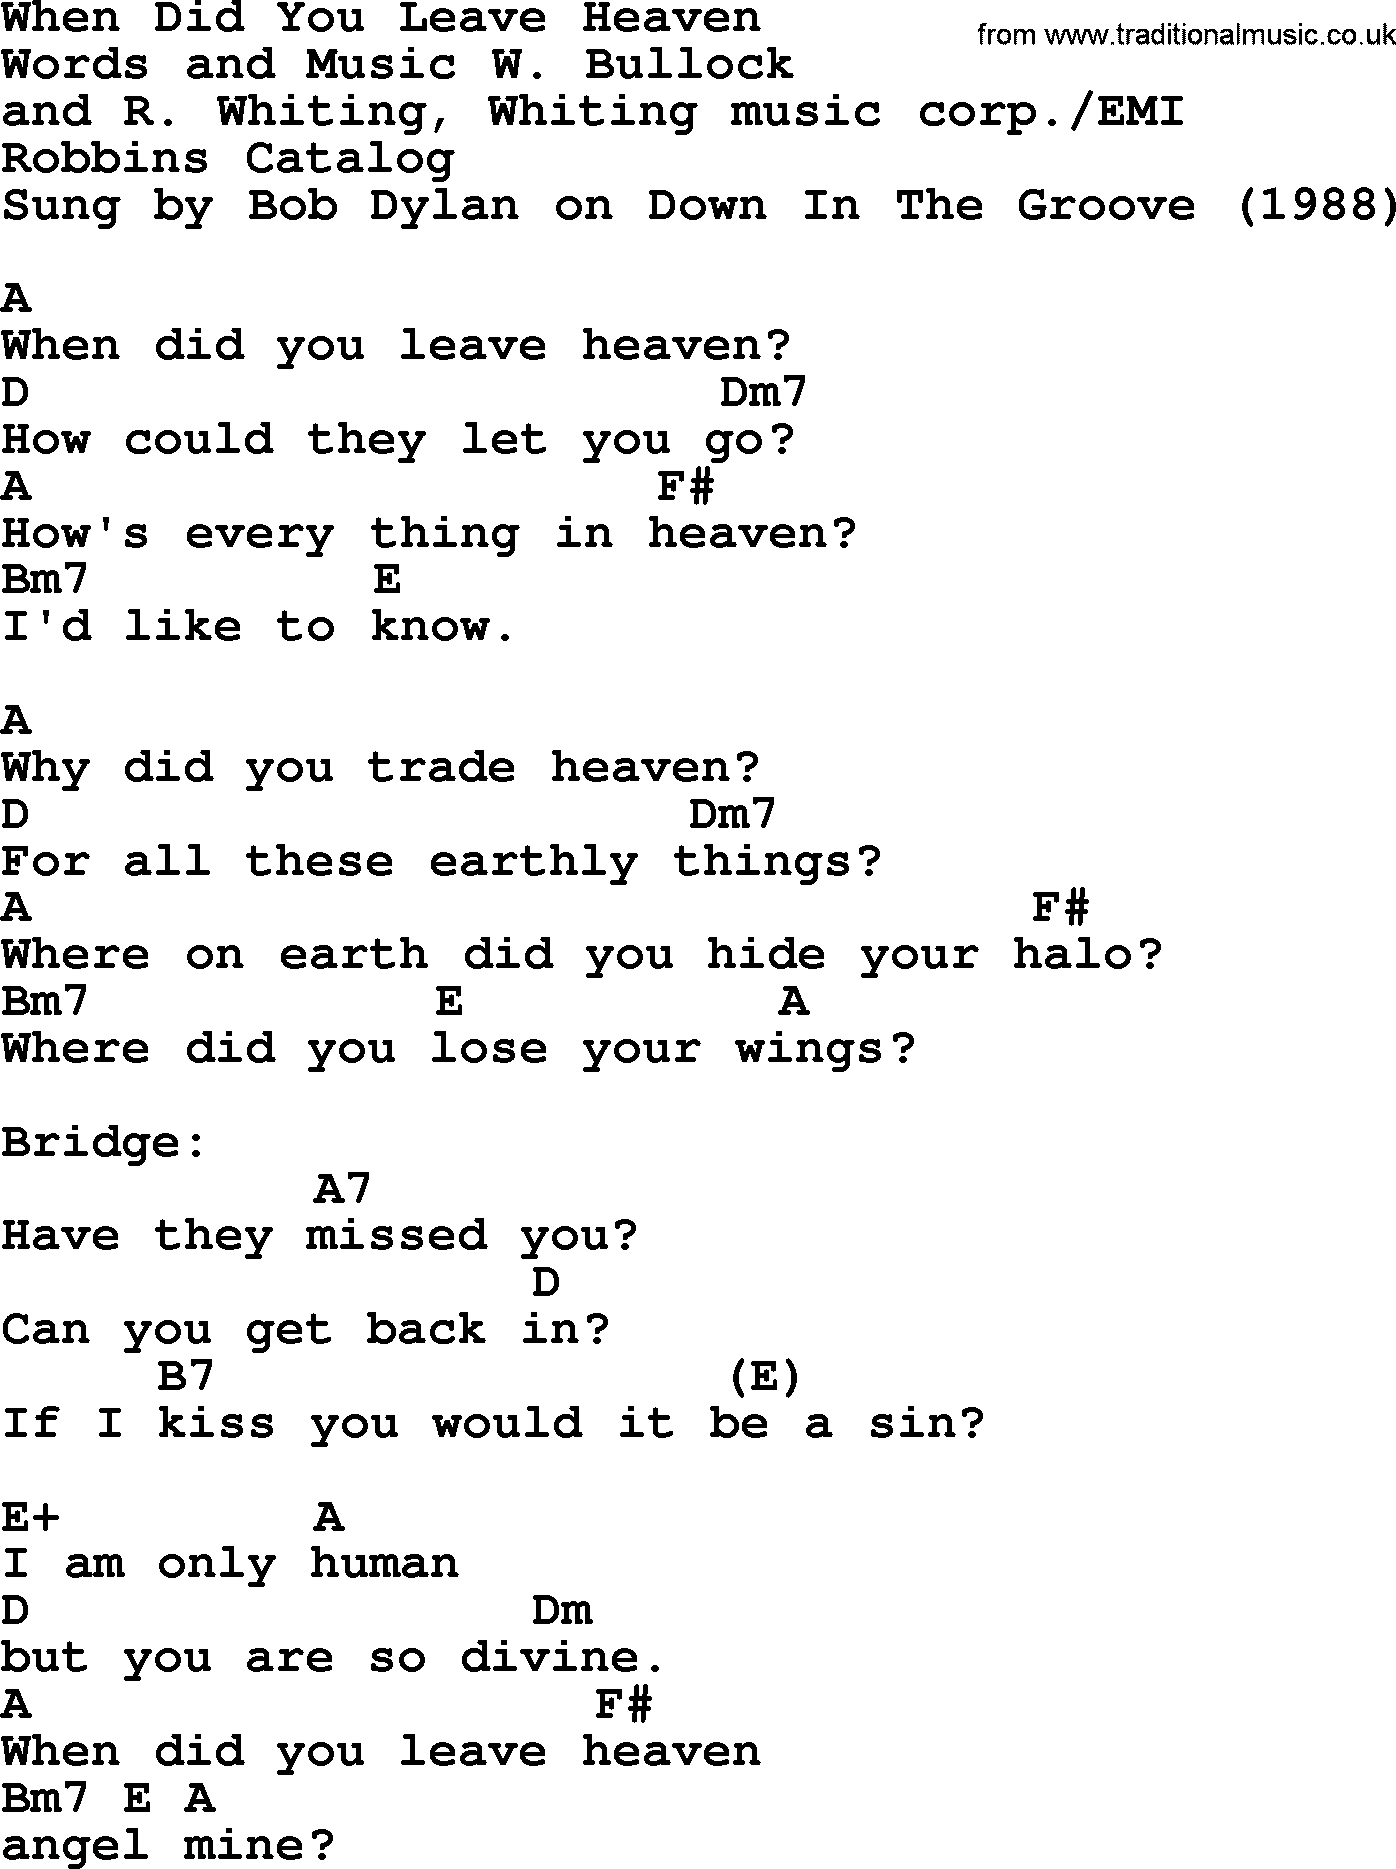 Bob Dylan song, lyrics with chords - When Did You Leave Heaven